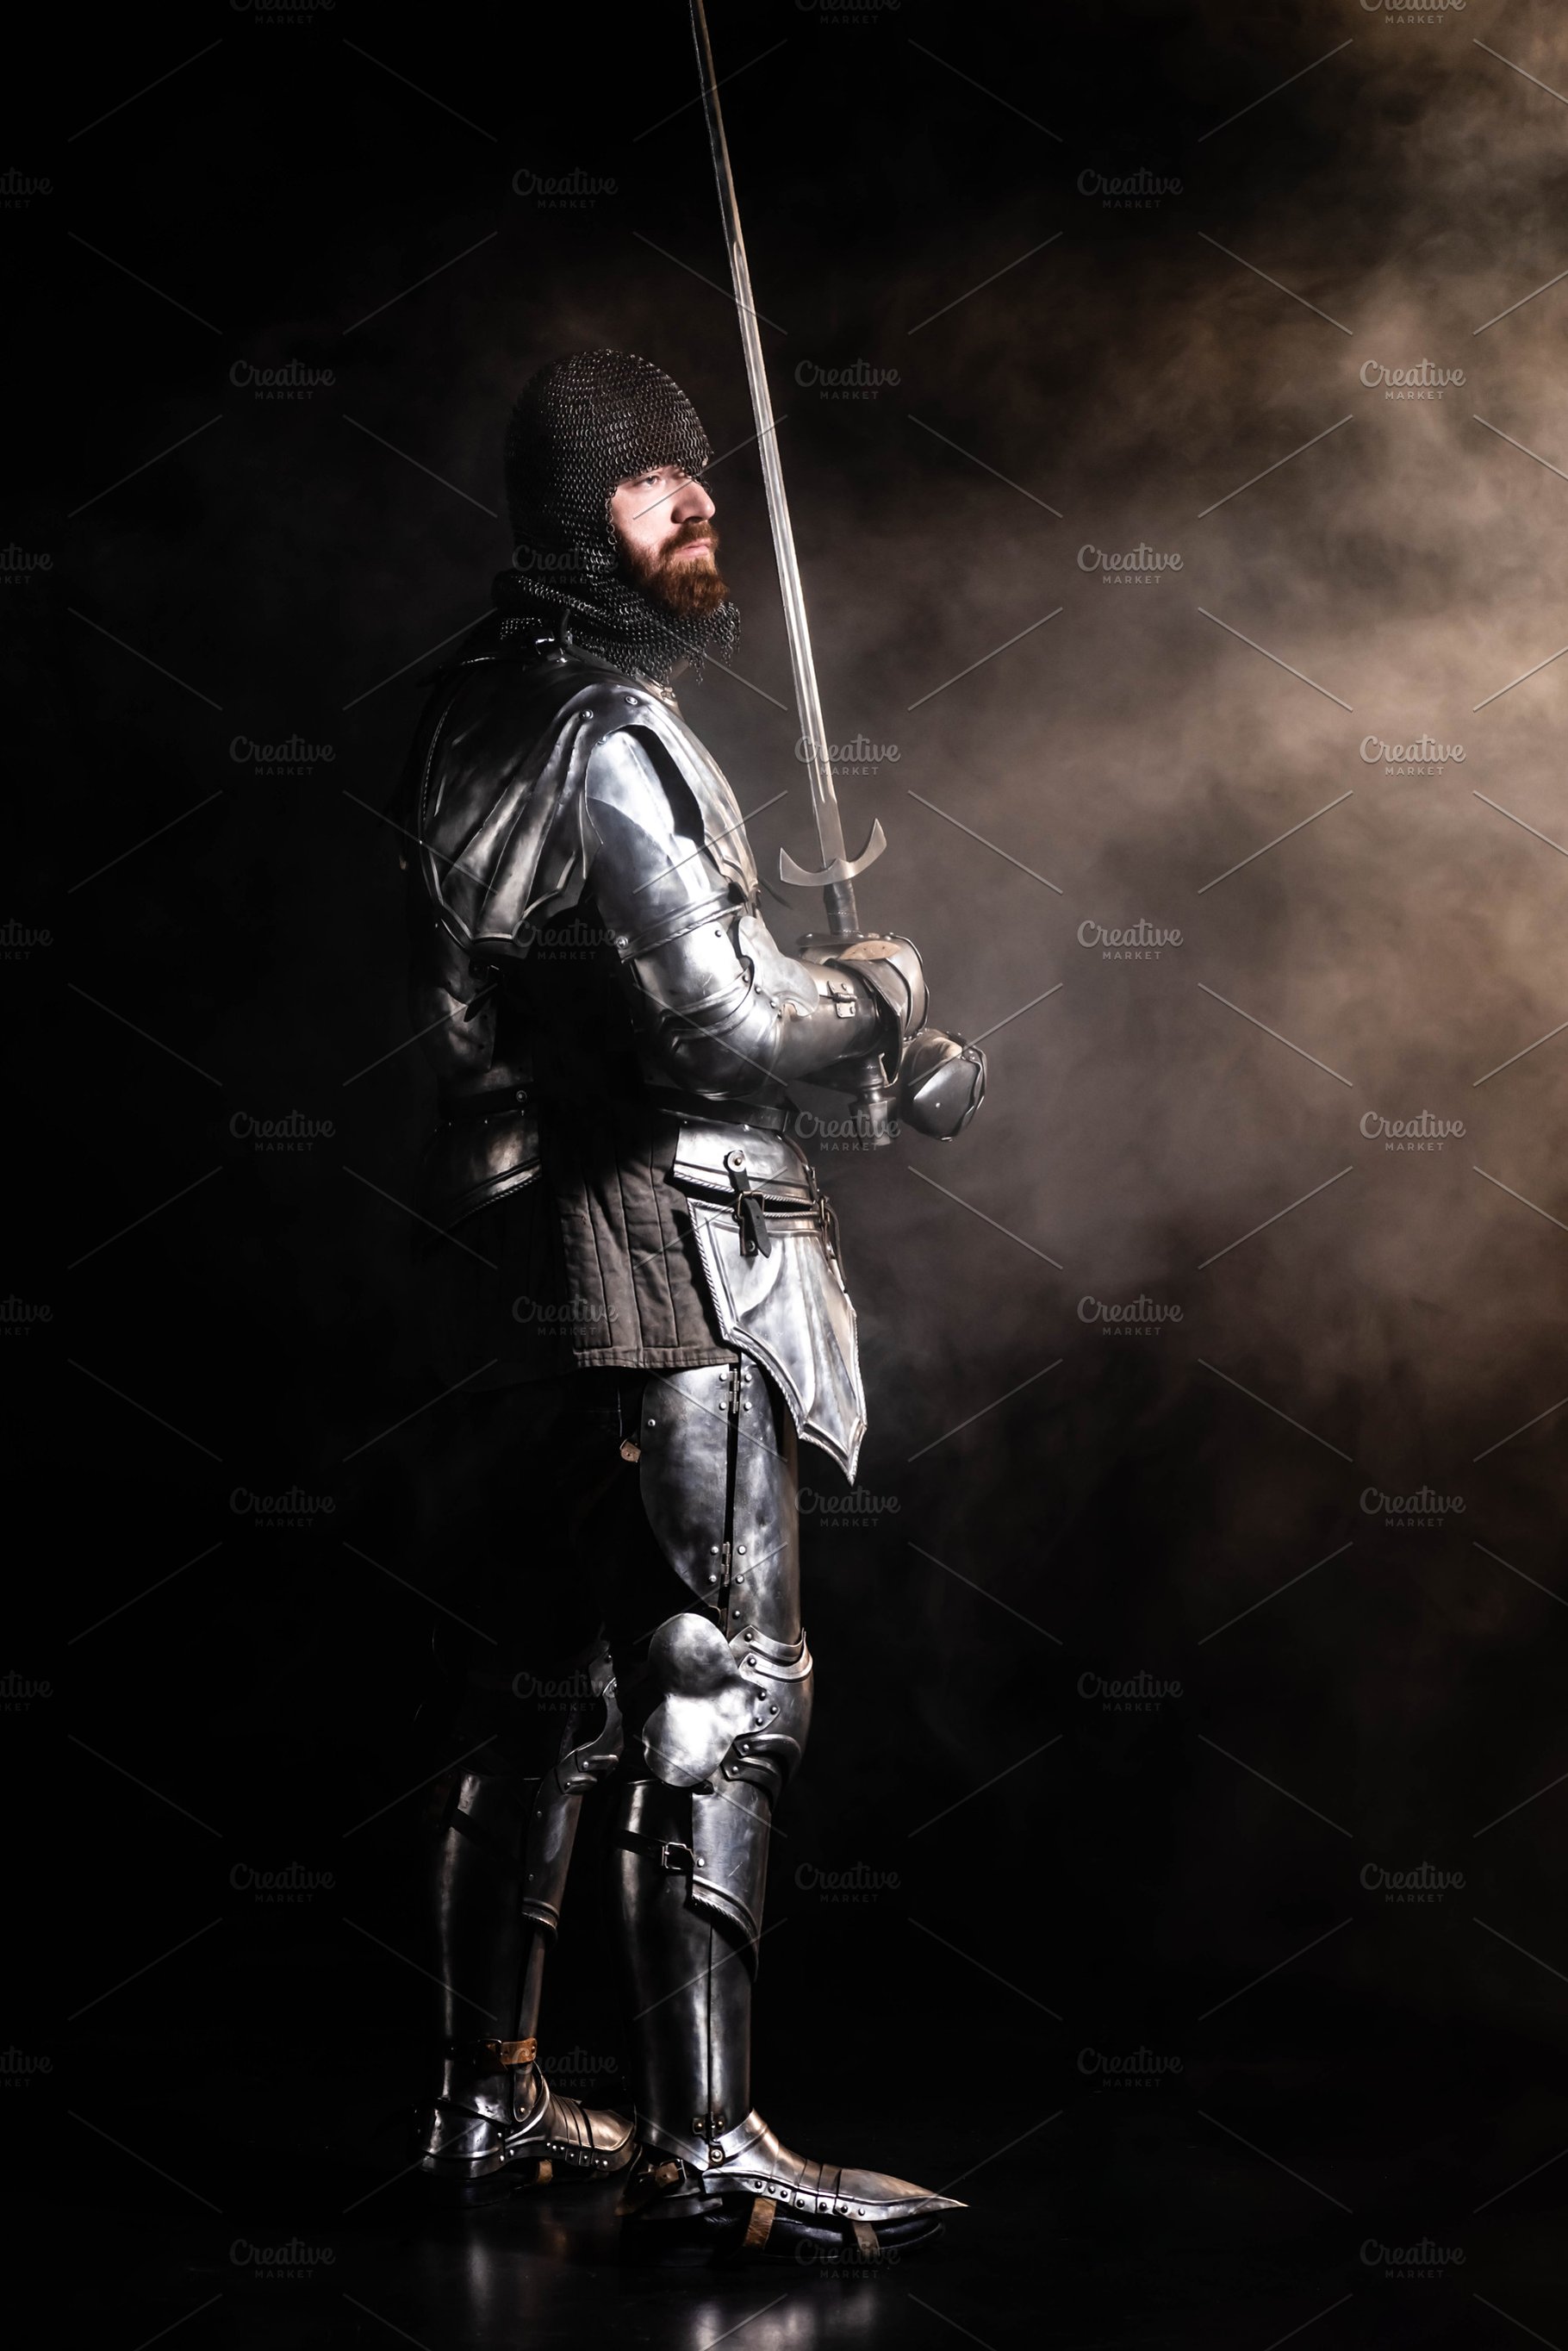 Handsome Knight In Armor Holding Swo High Quality People Image